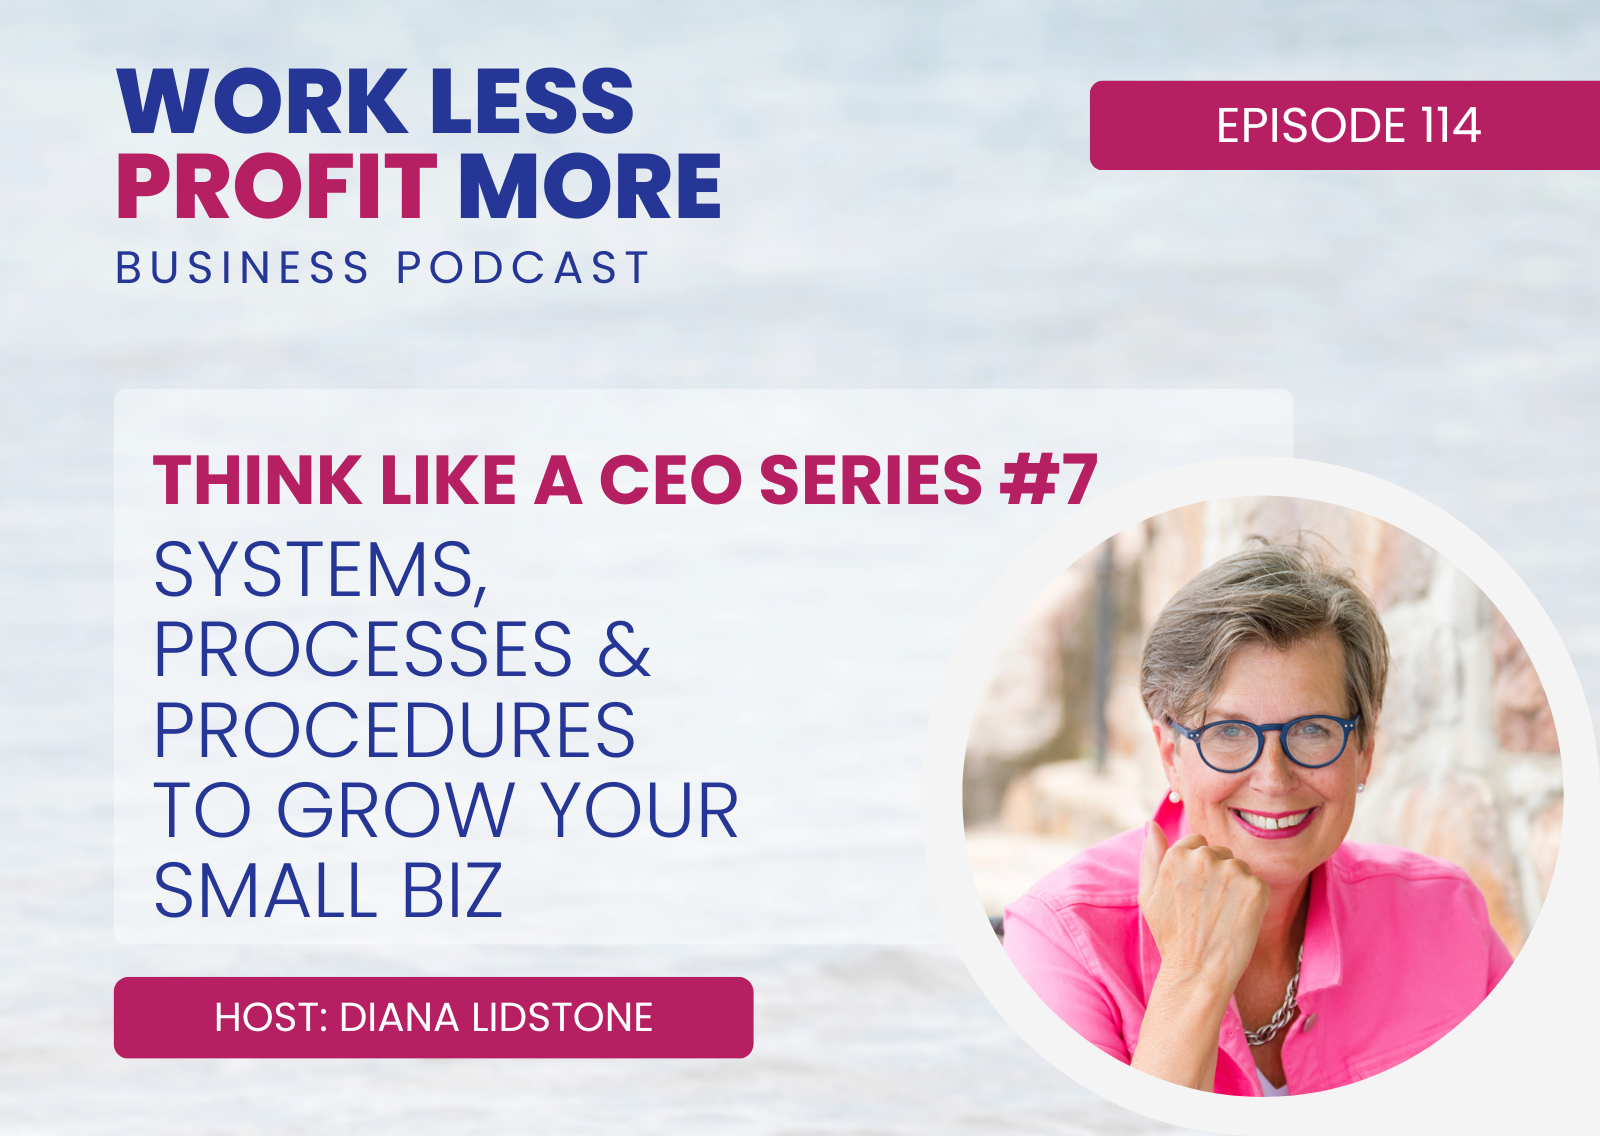 Systems, Processes & Procedures to GROW Your Small Biz